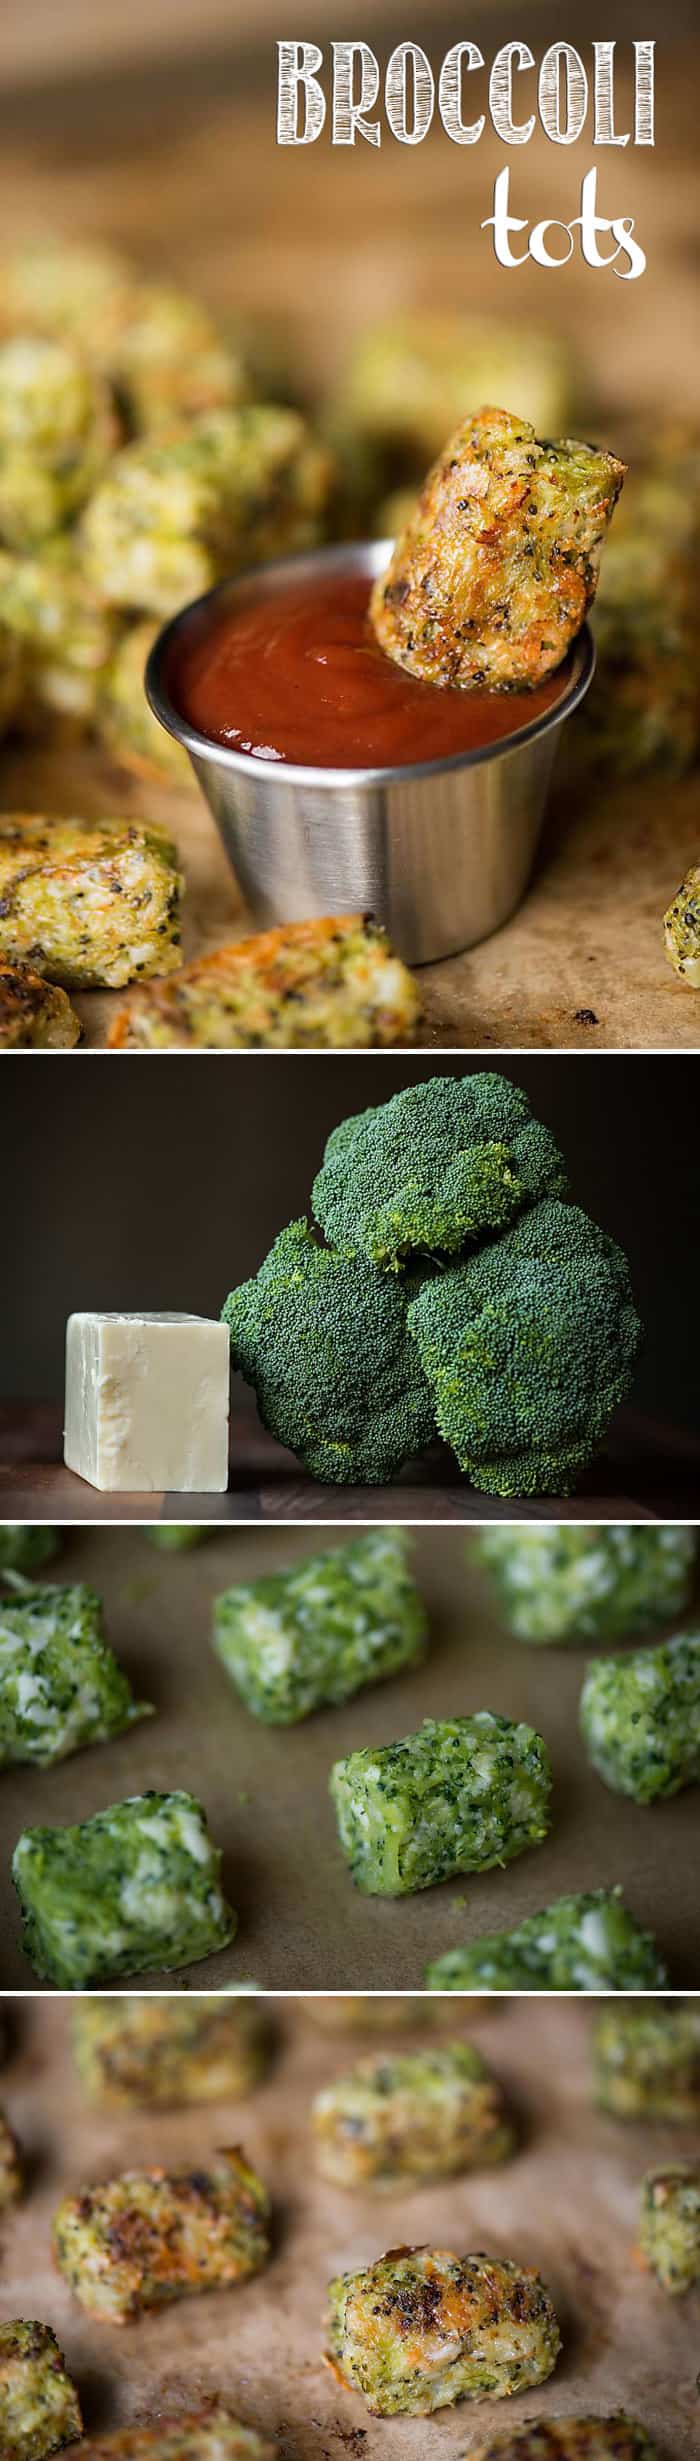 Since broccoli and cheese are one of life\'s great pairings, combine them into one low carb appetizer like these tasty Broccoli Tots!